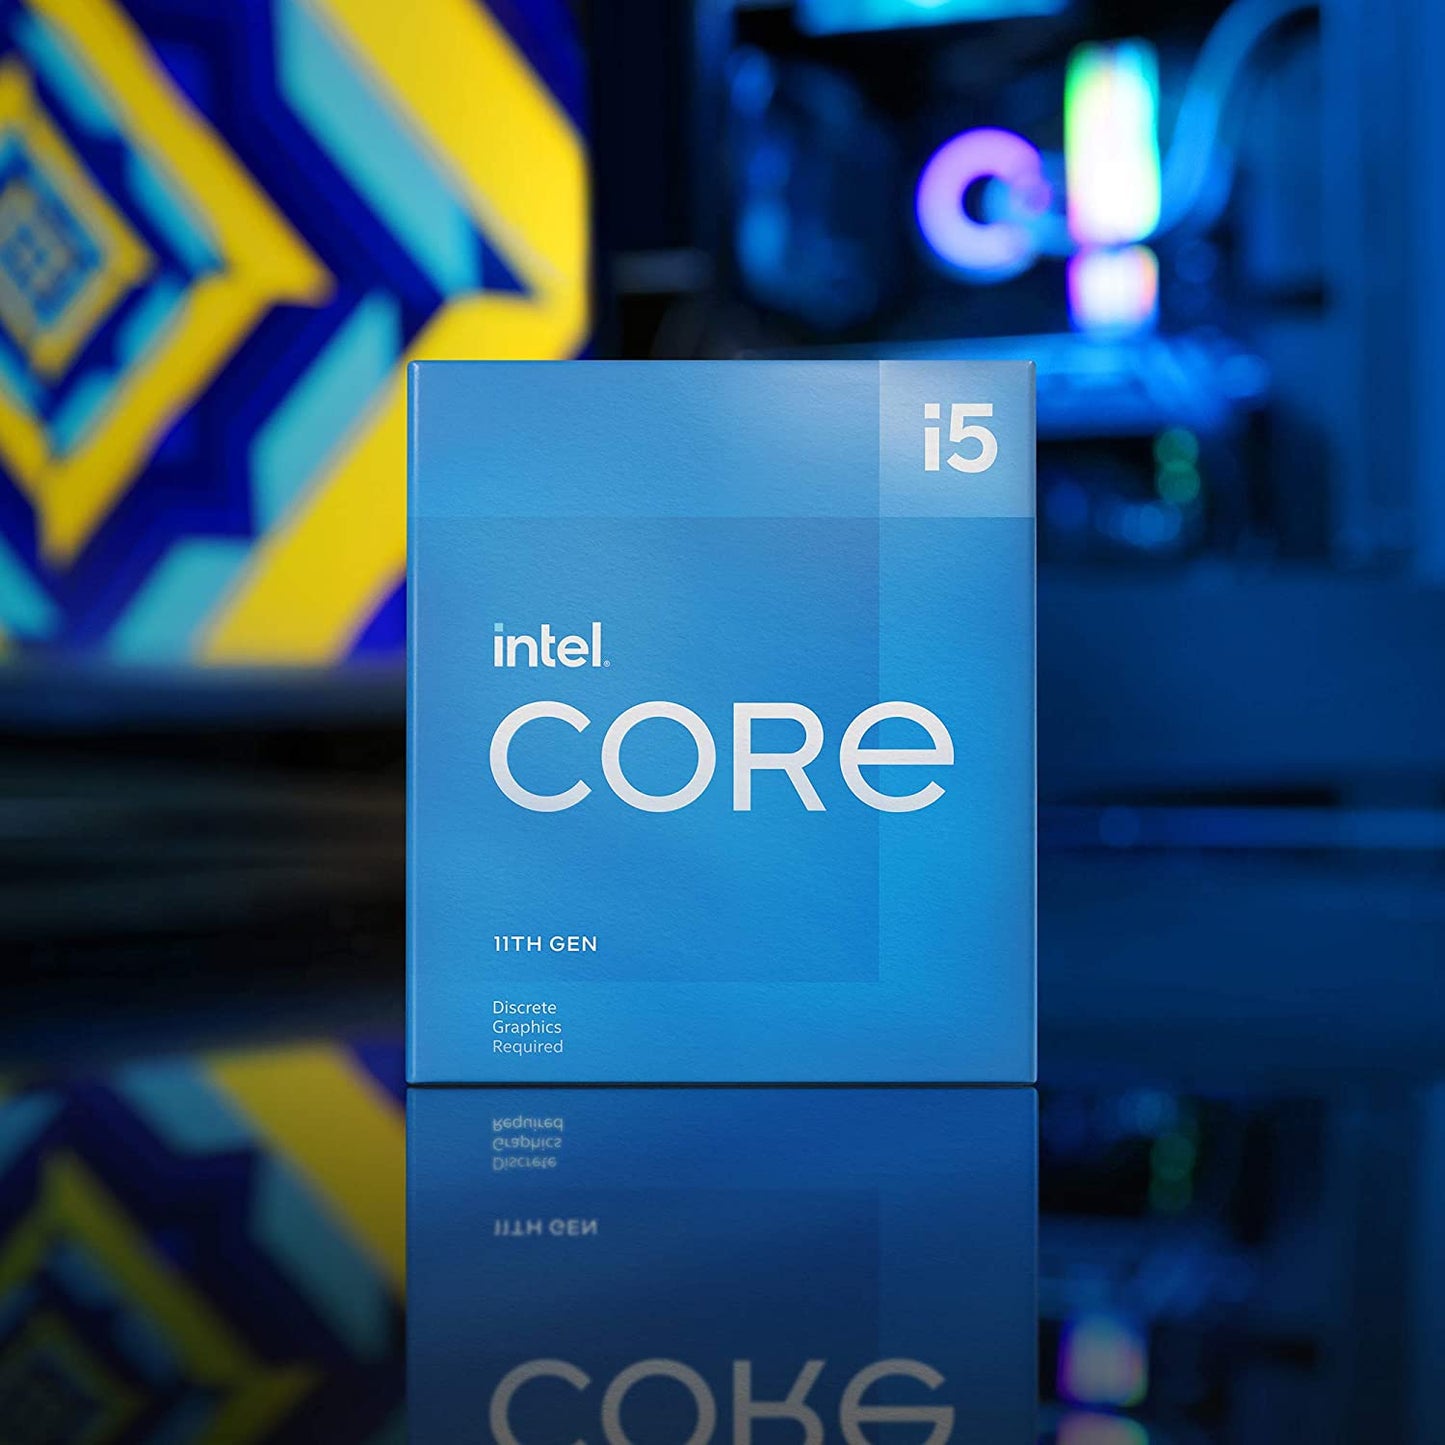 Intel Core i5-11400F Desktop Processor 6 Cores up to 4.4 GHz LGA1200 (Intel 500 Series and Select 400 Series Chipset) 65W